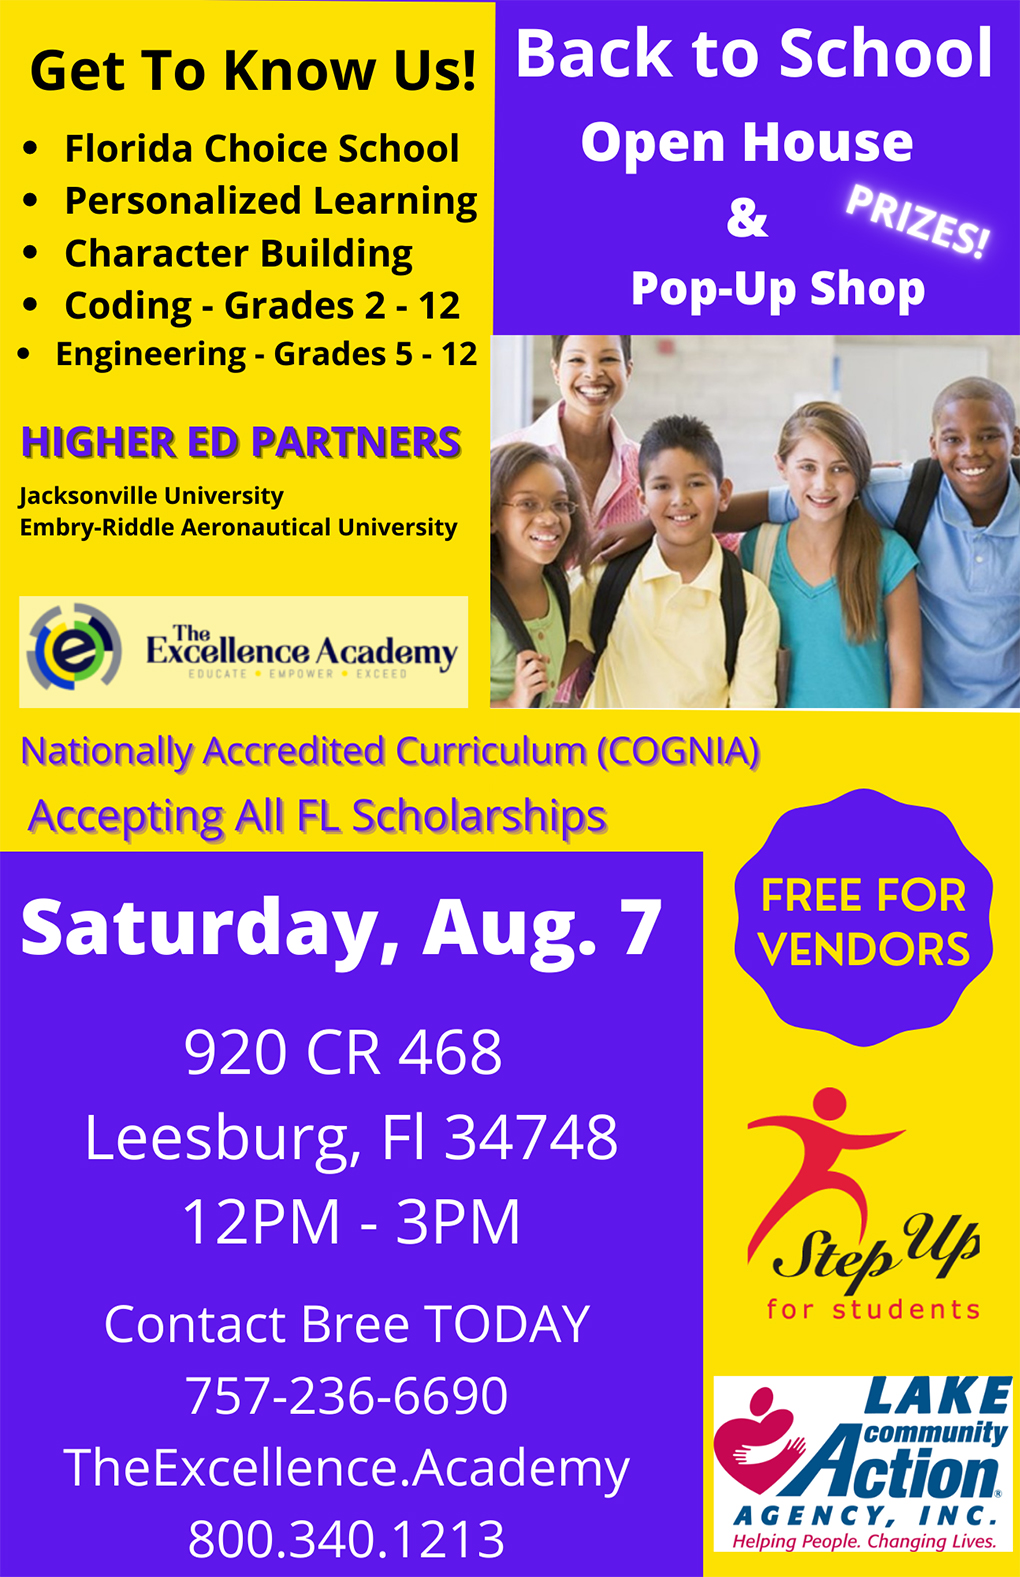 Back to School Open HOuse and Pop-Up Shop, Satureday August 7th 12:00 - 3:00pm